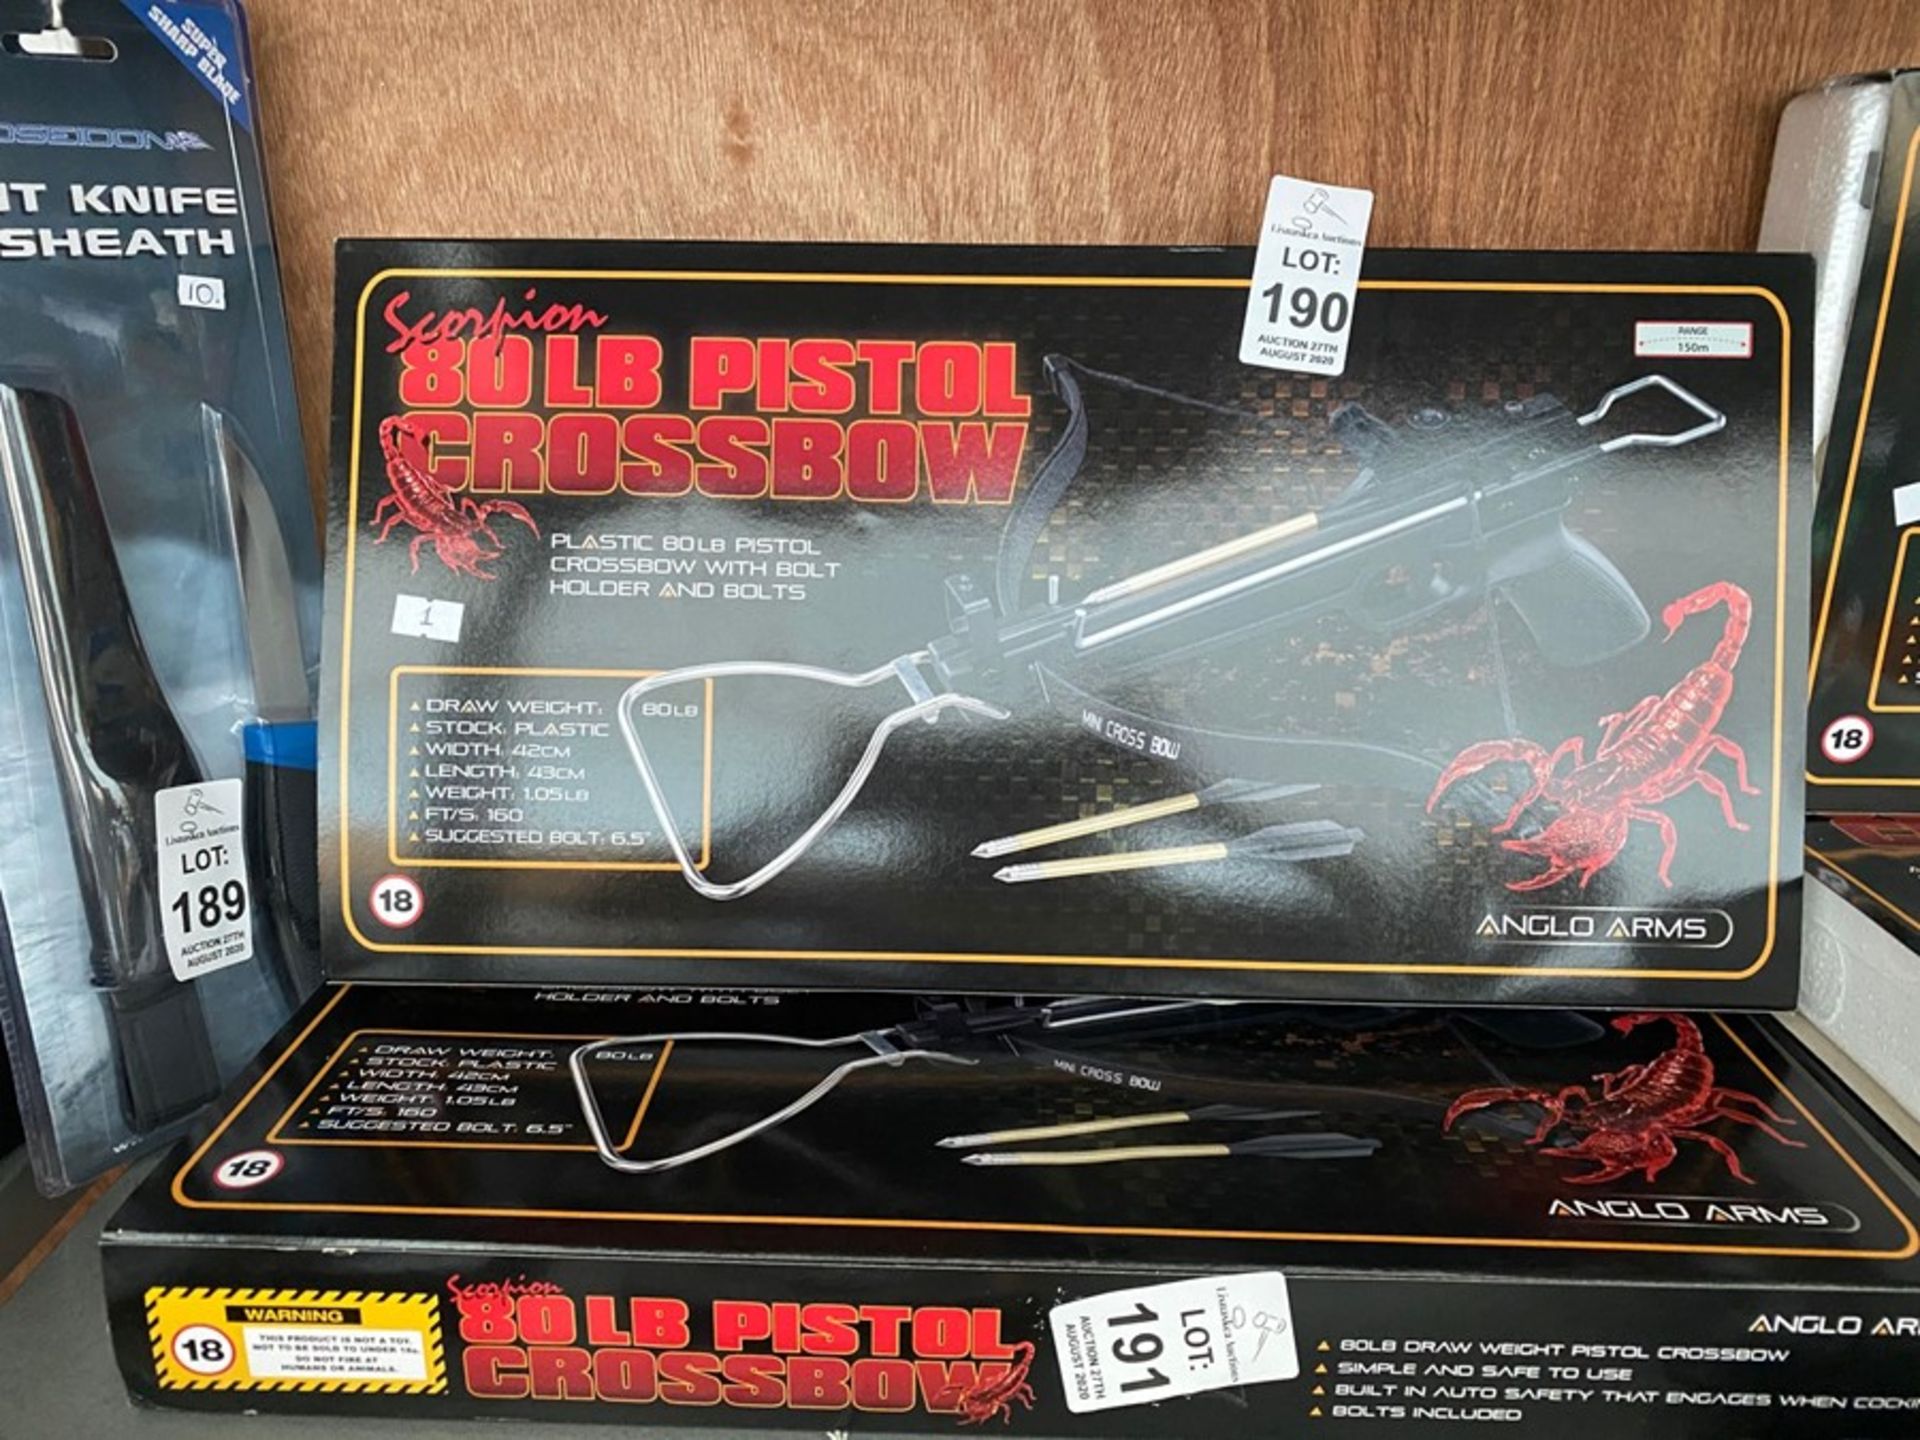 SCORPION 80LB PISTOL CROSSBOW (OVER 18YRS ONLY)